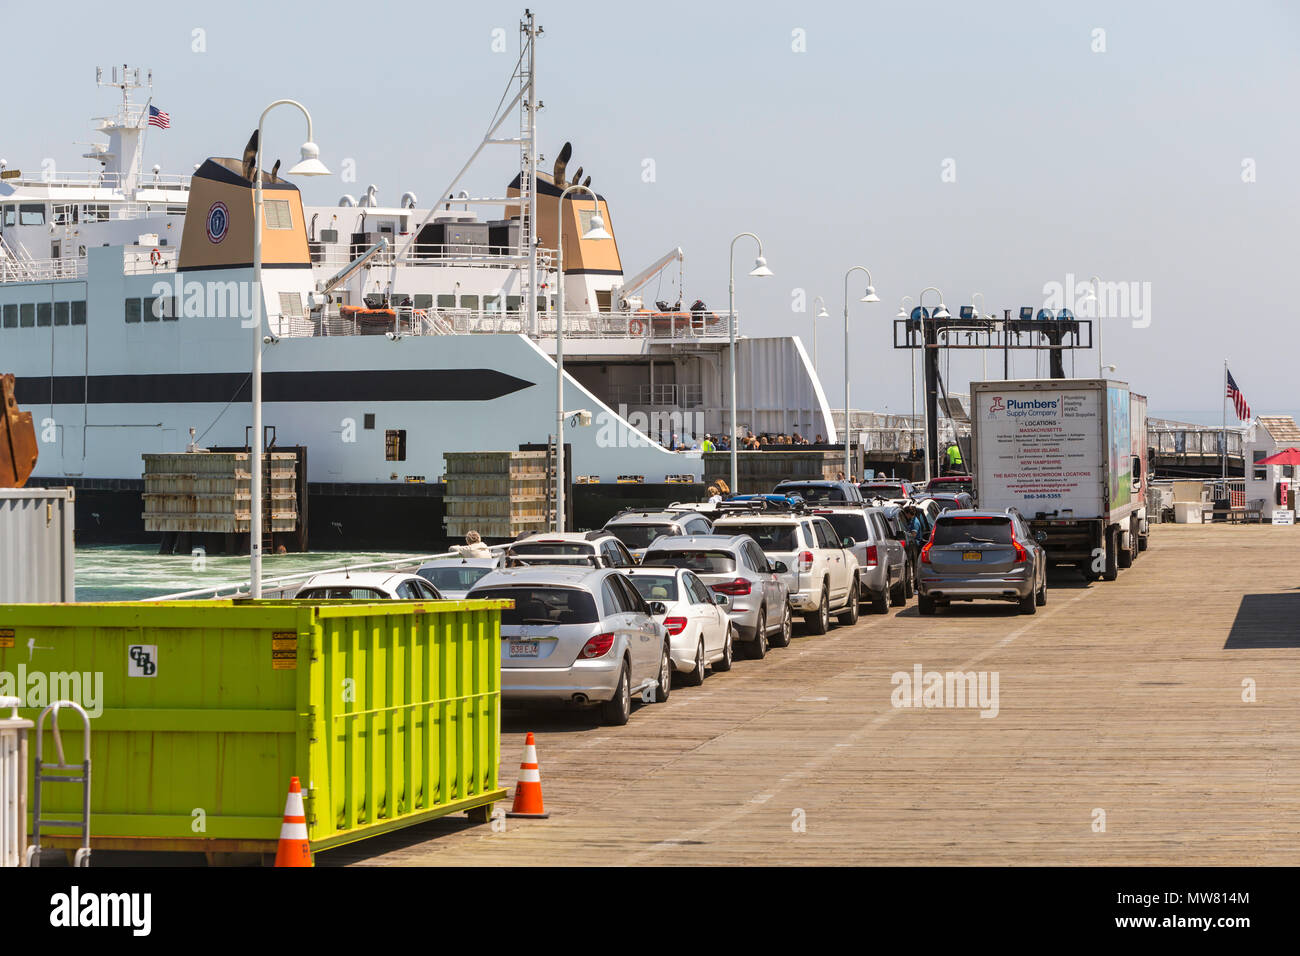 Vehicles wait in line to board a Steamship Authority ferry preparing to depart the ferry terminal in Oak Bluffs, Massachusetts on Martha's Vineyard. Stock Photo